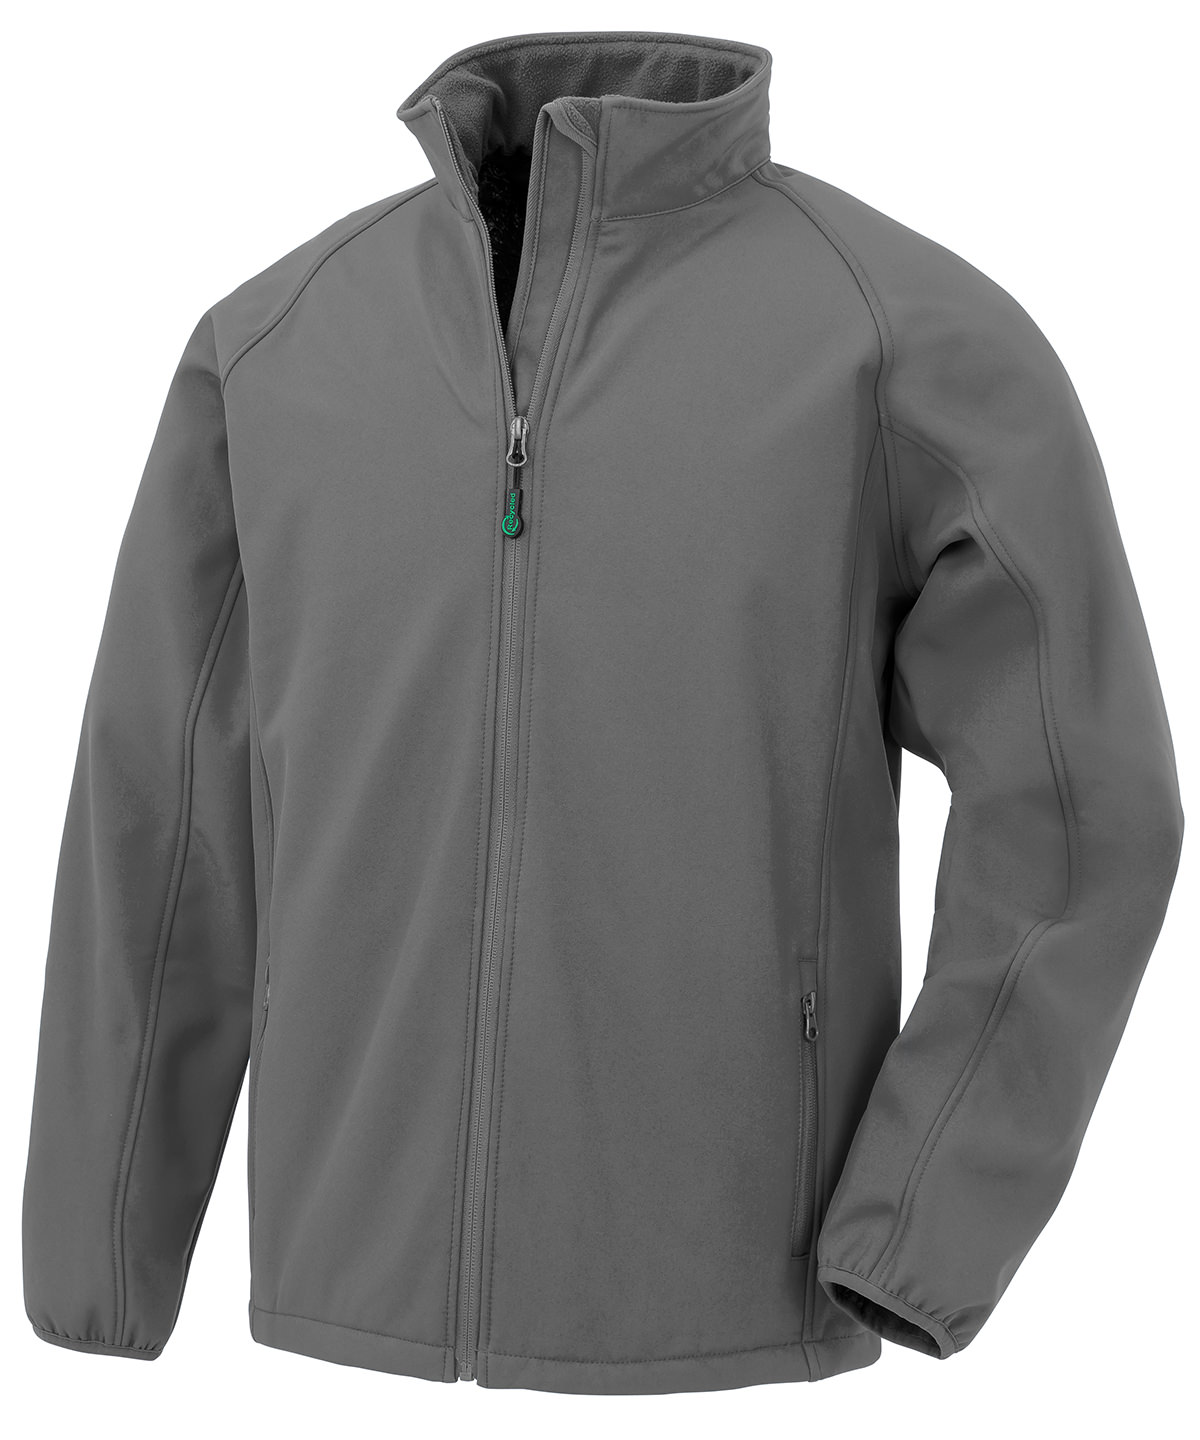 Men's recycled 2-layer printable softshell jacket